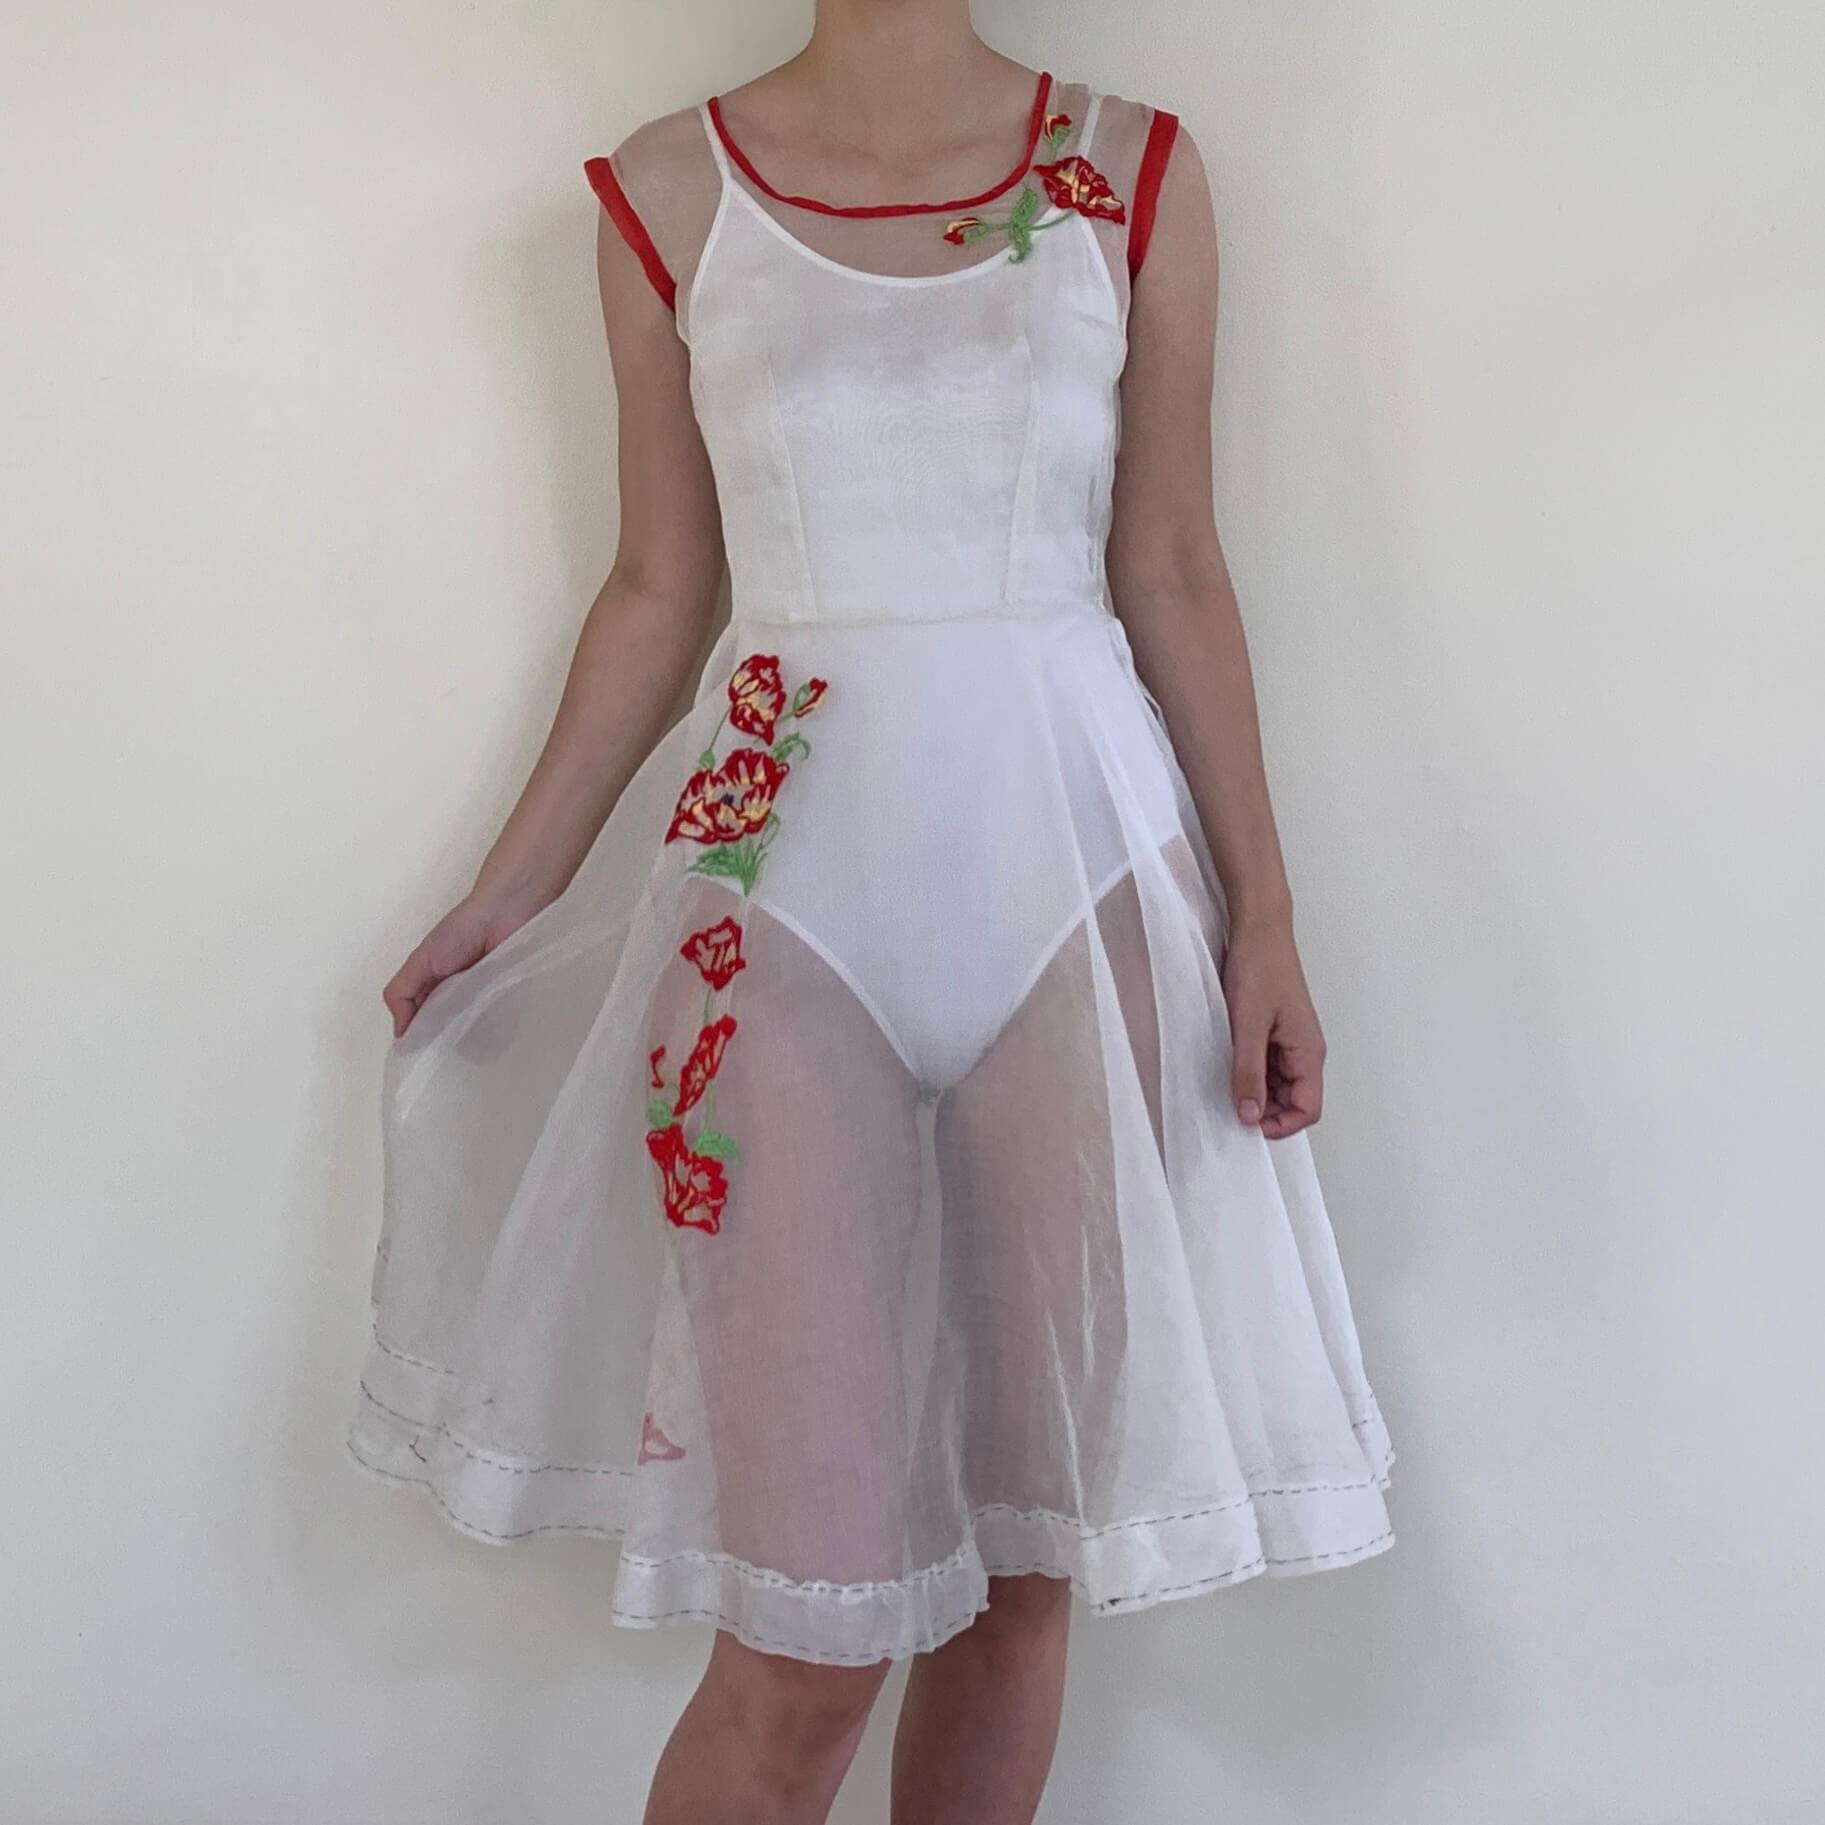 1930s floral dress in sheer white with red trim